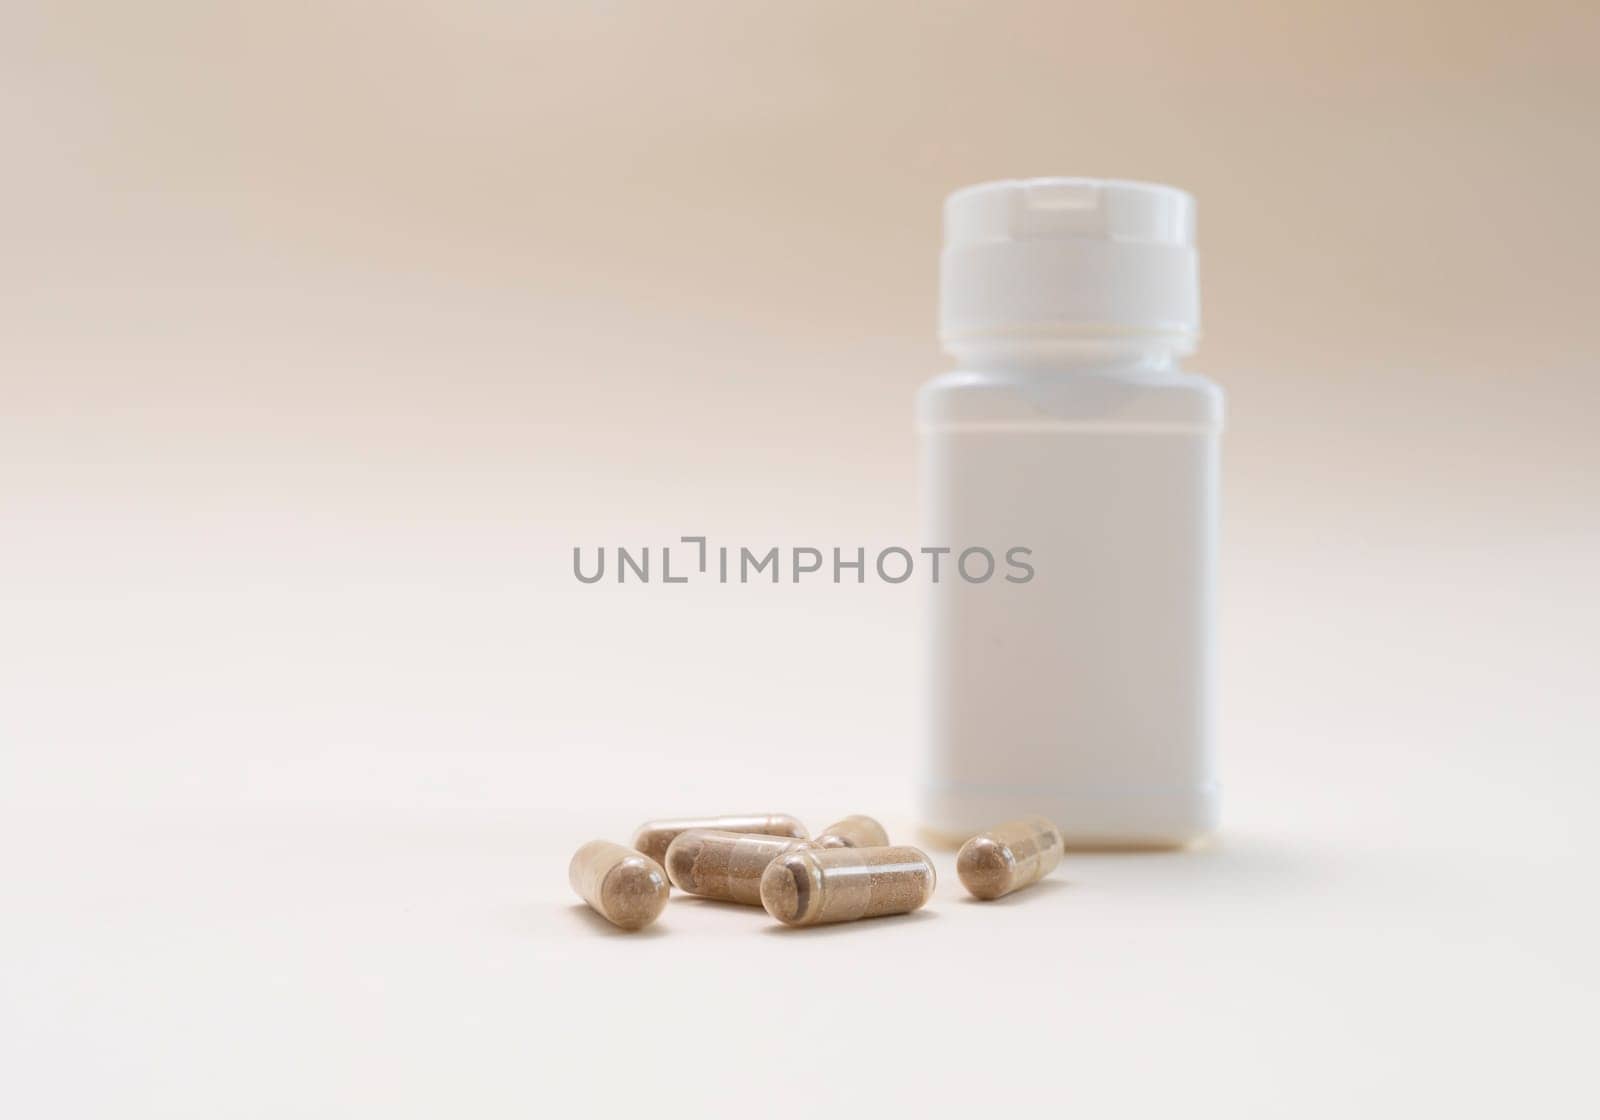 Slippery Elm Pills, Softgels and White Empty Bottle, Container on Beige Background. Mockup Pharmacy. Copy Space For Text. Horizontal Plane. Healthy Lifestyle. Probiotic. by netatsi